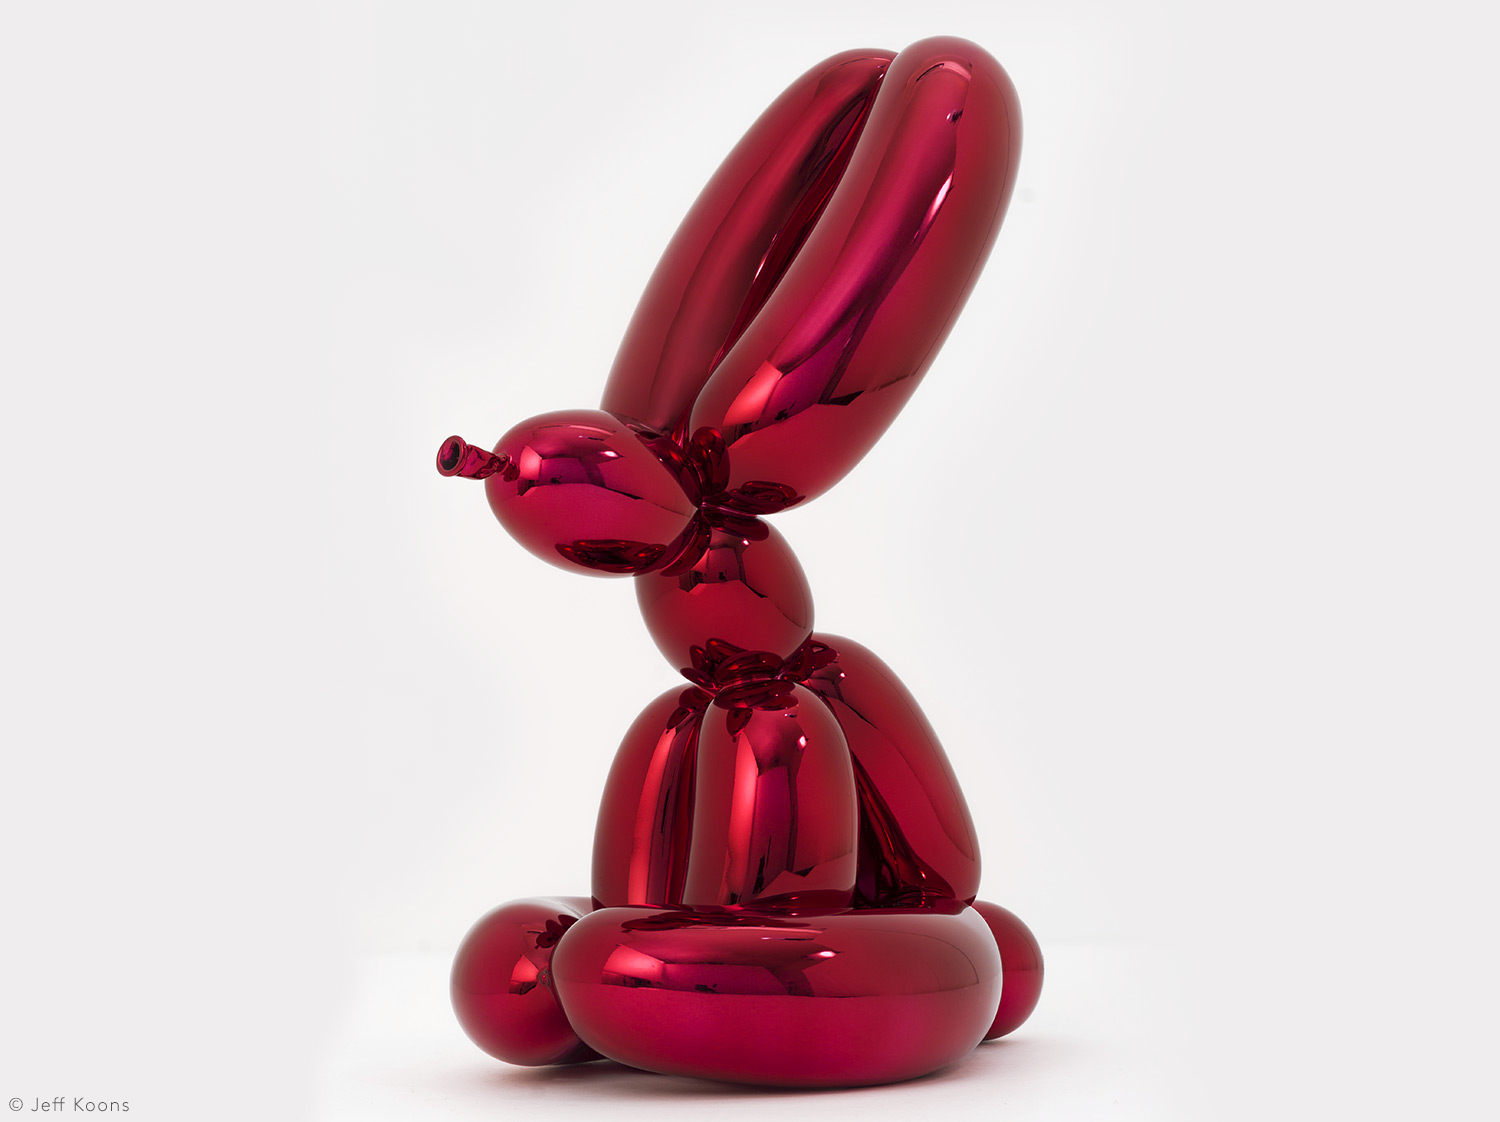 China Porcelain edition of the collection BALLOON RABBIT (RED) by Jeff Koons | Bernardaud